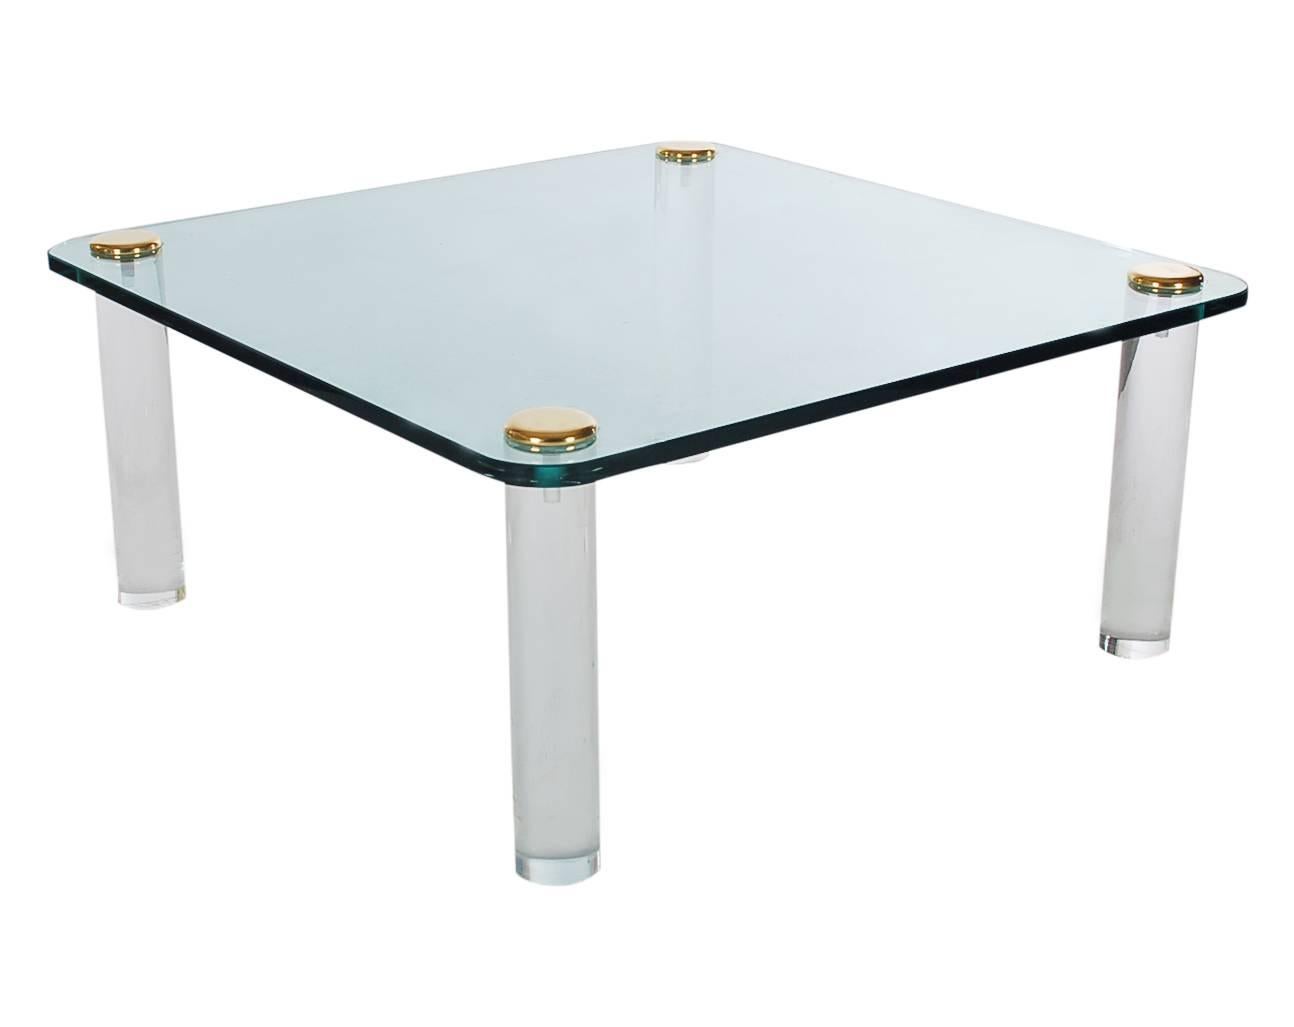 A smaller scale coffee table designed by Leon Rosen for the Pace Collection. It features extra thick acrylic legs with a floating glass top. 

In the style of: Karl Springer.